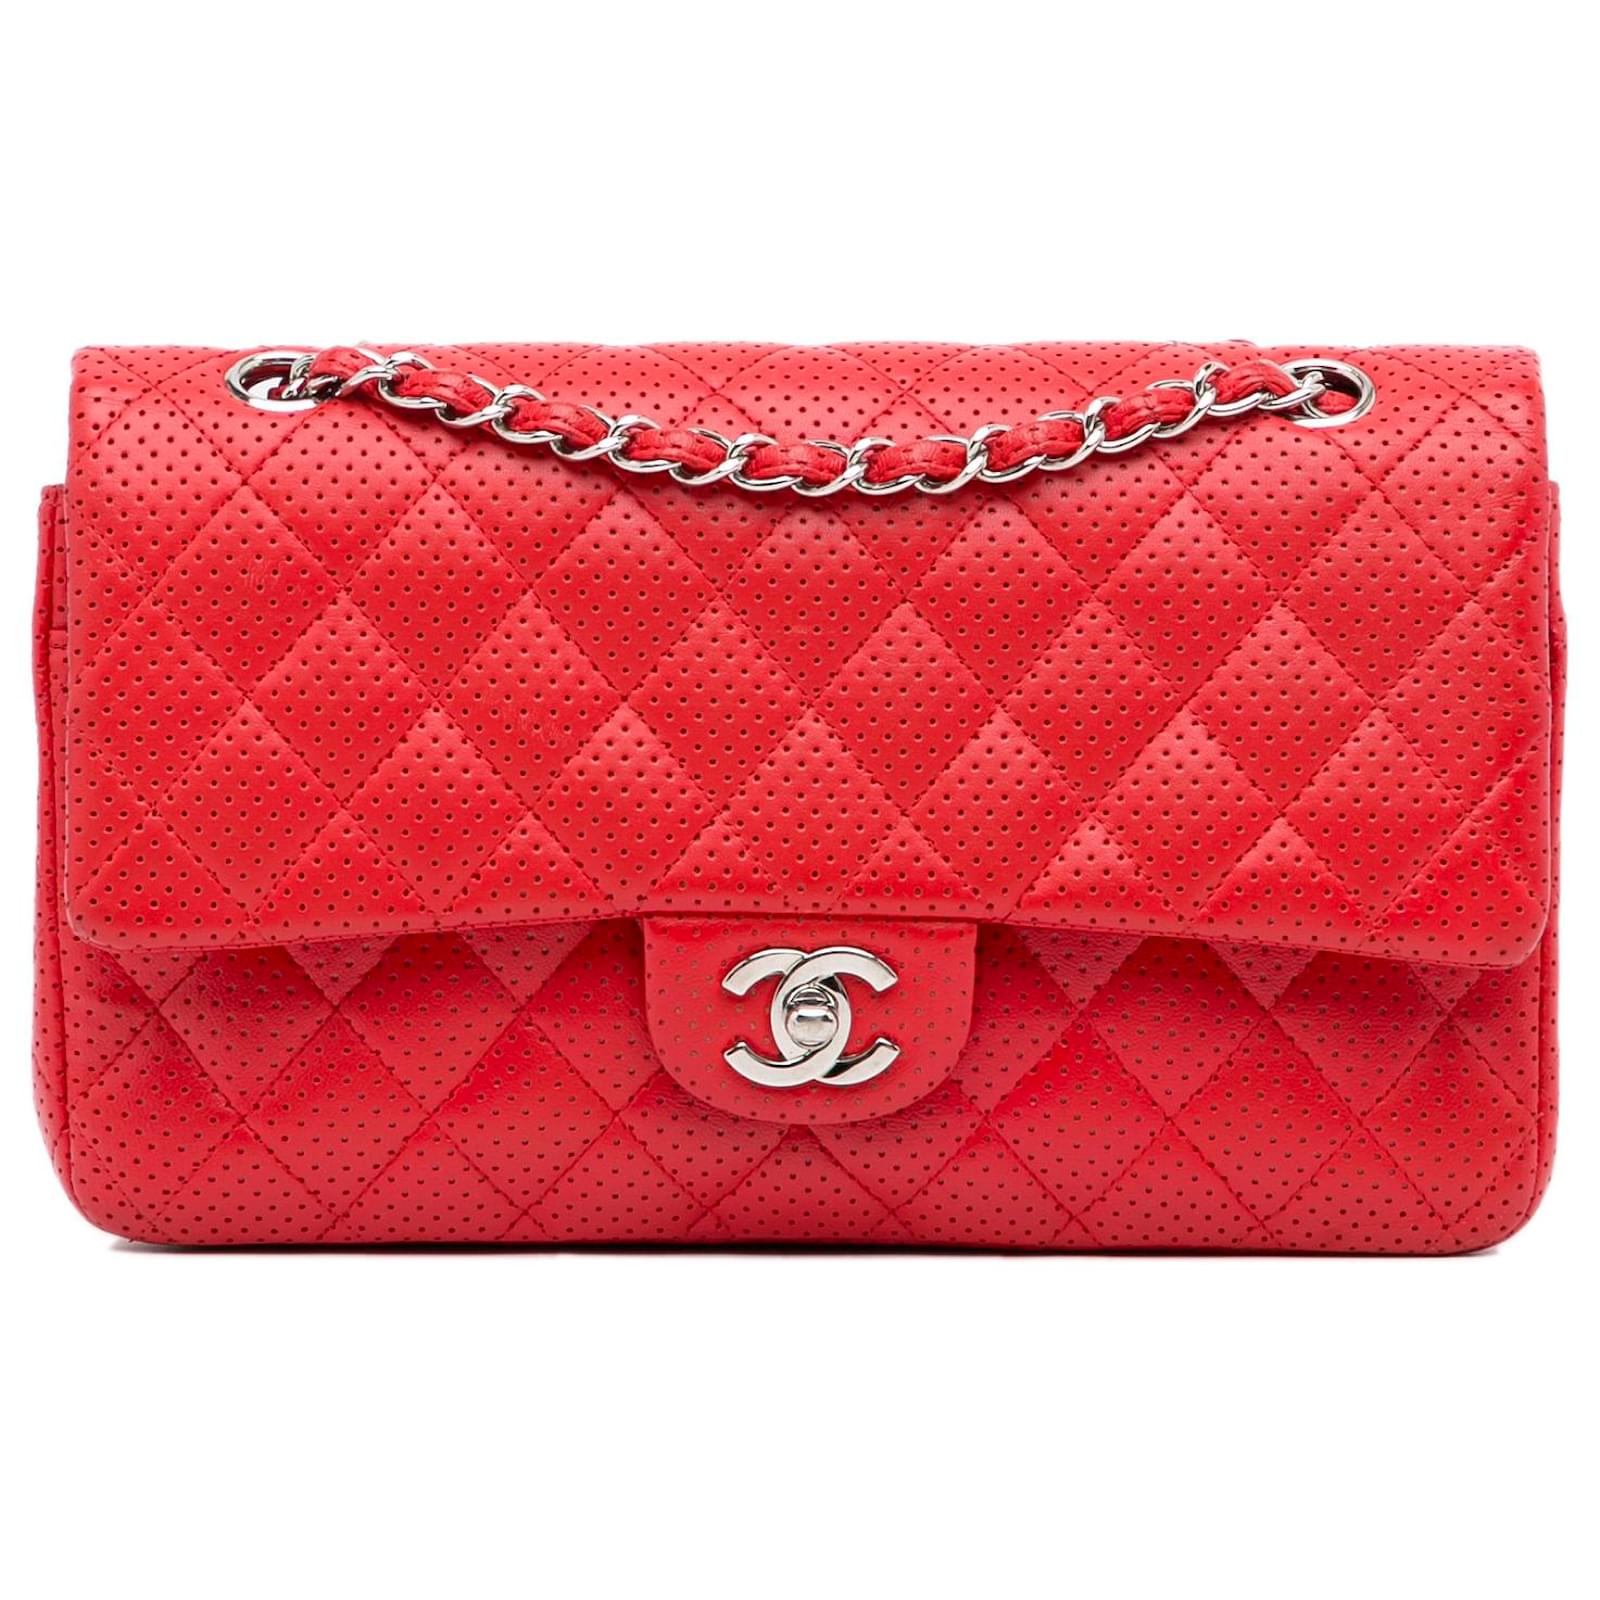 Chanel Red Medium Classic Perforated lined Flap Leather ref.963205 ...